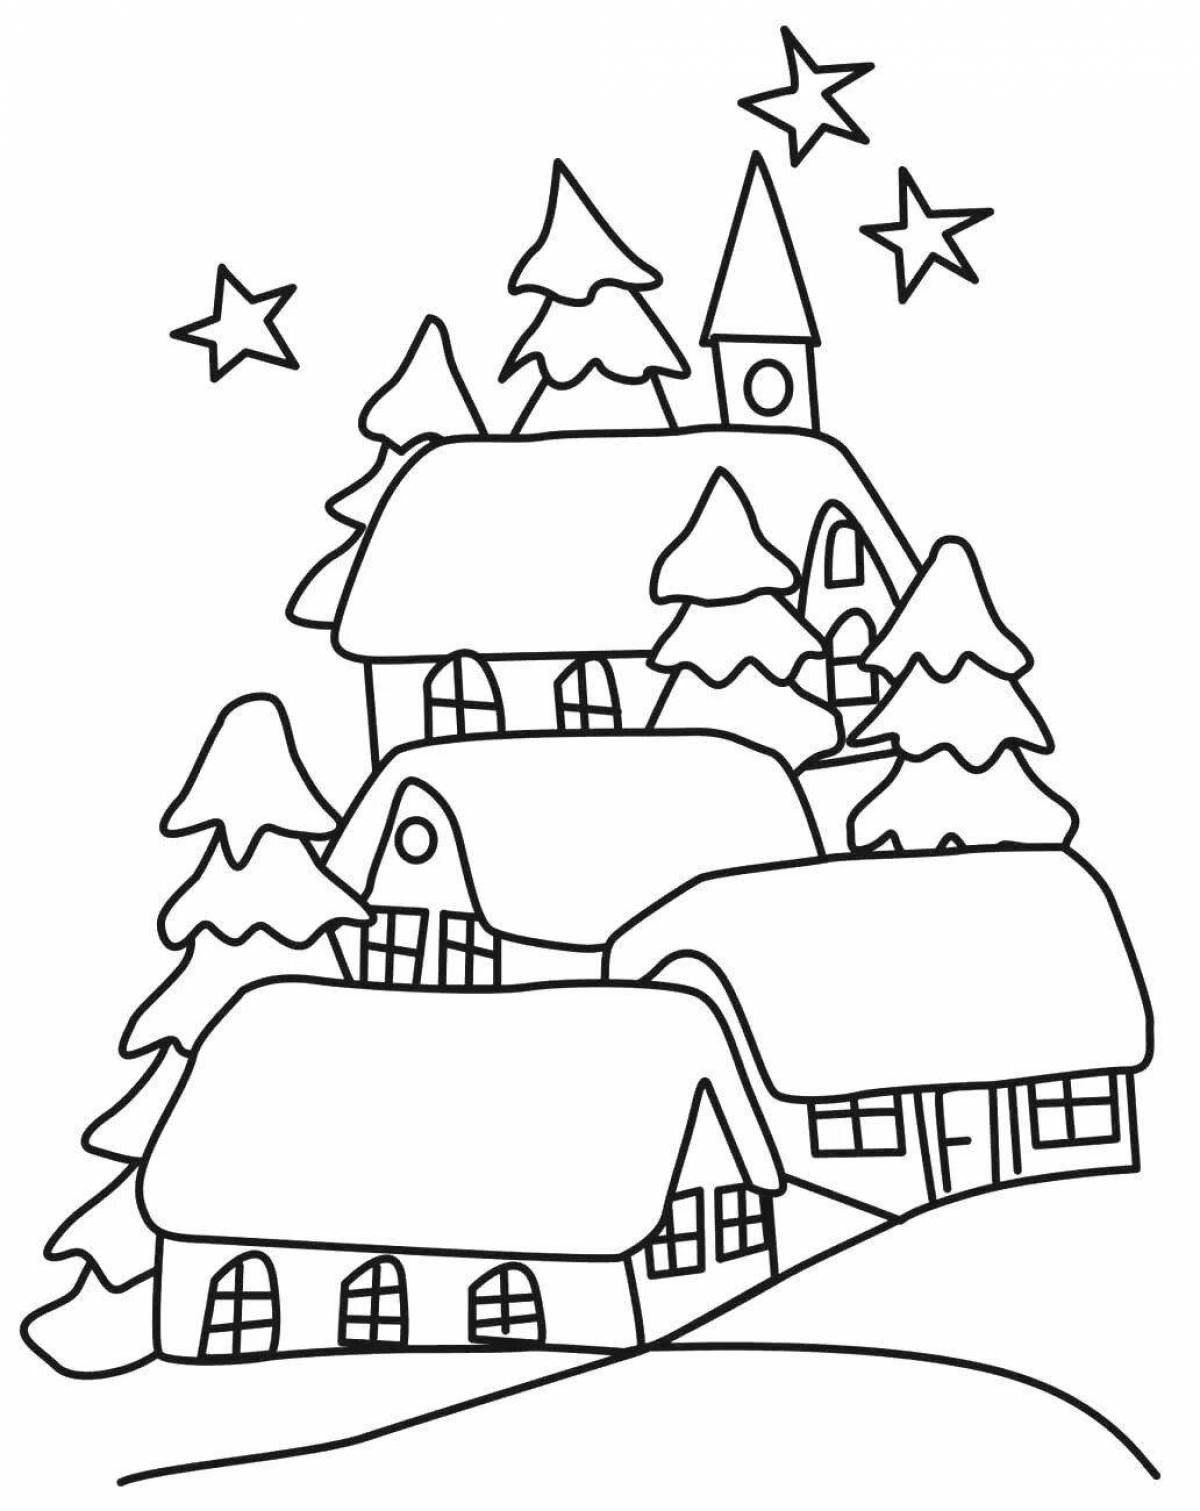 Sparkling house Christmas coloring